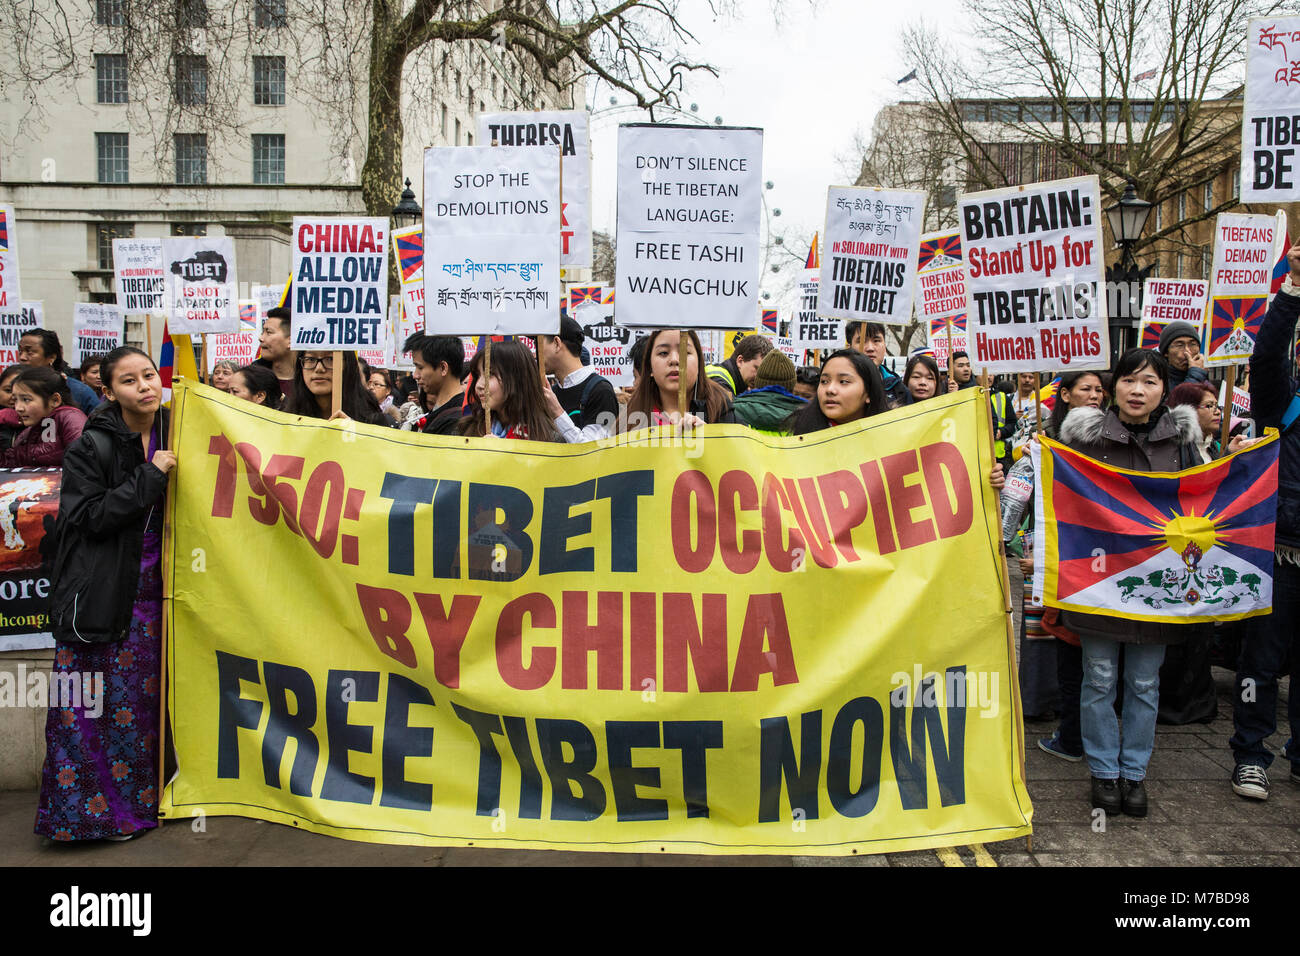 London, UK. 10th March, 2018. Members of the UK's Tibetan community attend the annual Uprising Day rally opposite Downing Street prior to a march to the Chinese embassy. Tibetan Uprising Day, observed on 10th March,  commemorates the 1959 Tibetan uprising against the presence of the People's Republic of China in Tibet. It resulted in a violent crackdown on Tibetan independence movements and the flight of the Dalai Lama into exile. Credit: Mark Kerrison/Alamy Live News Stock Photo